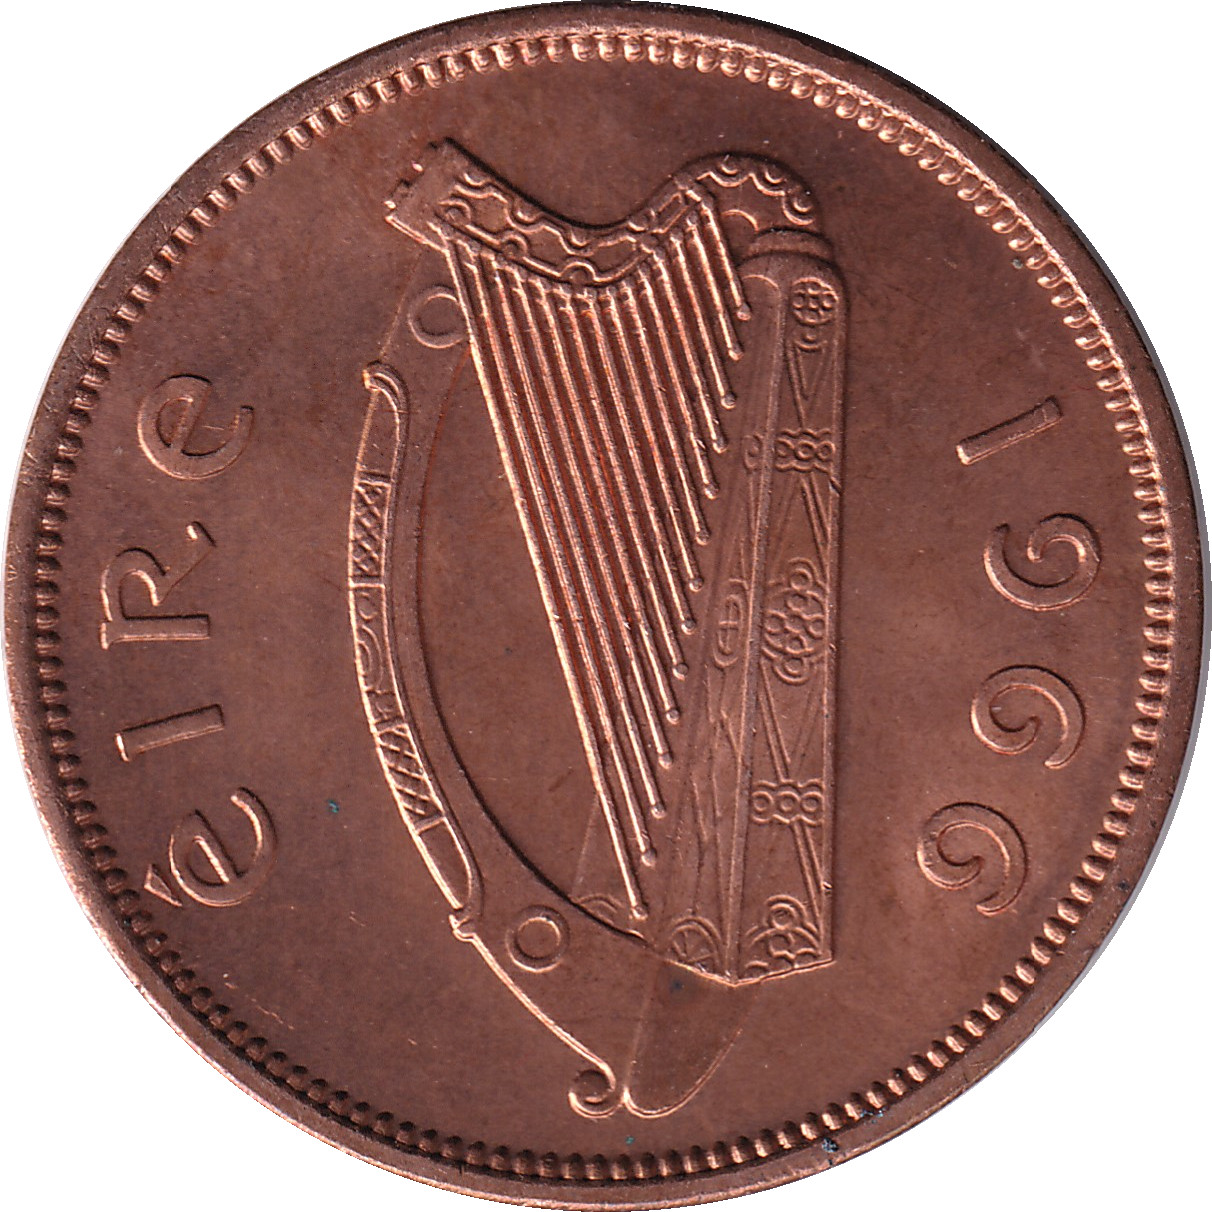 1/2 penny - EIRE